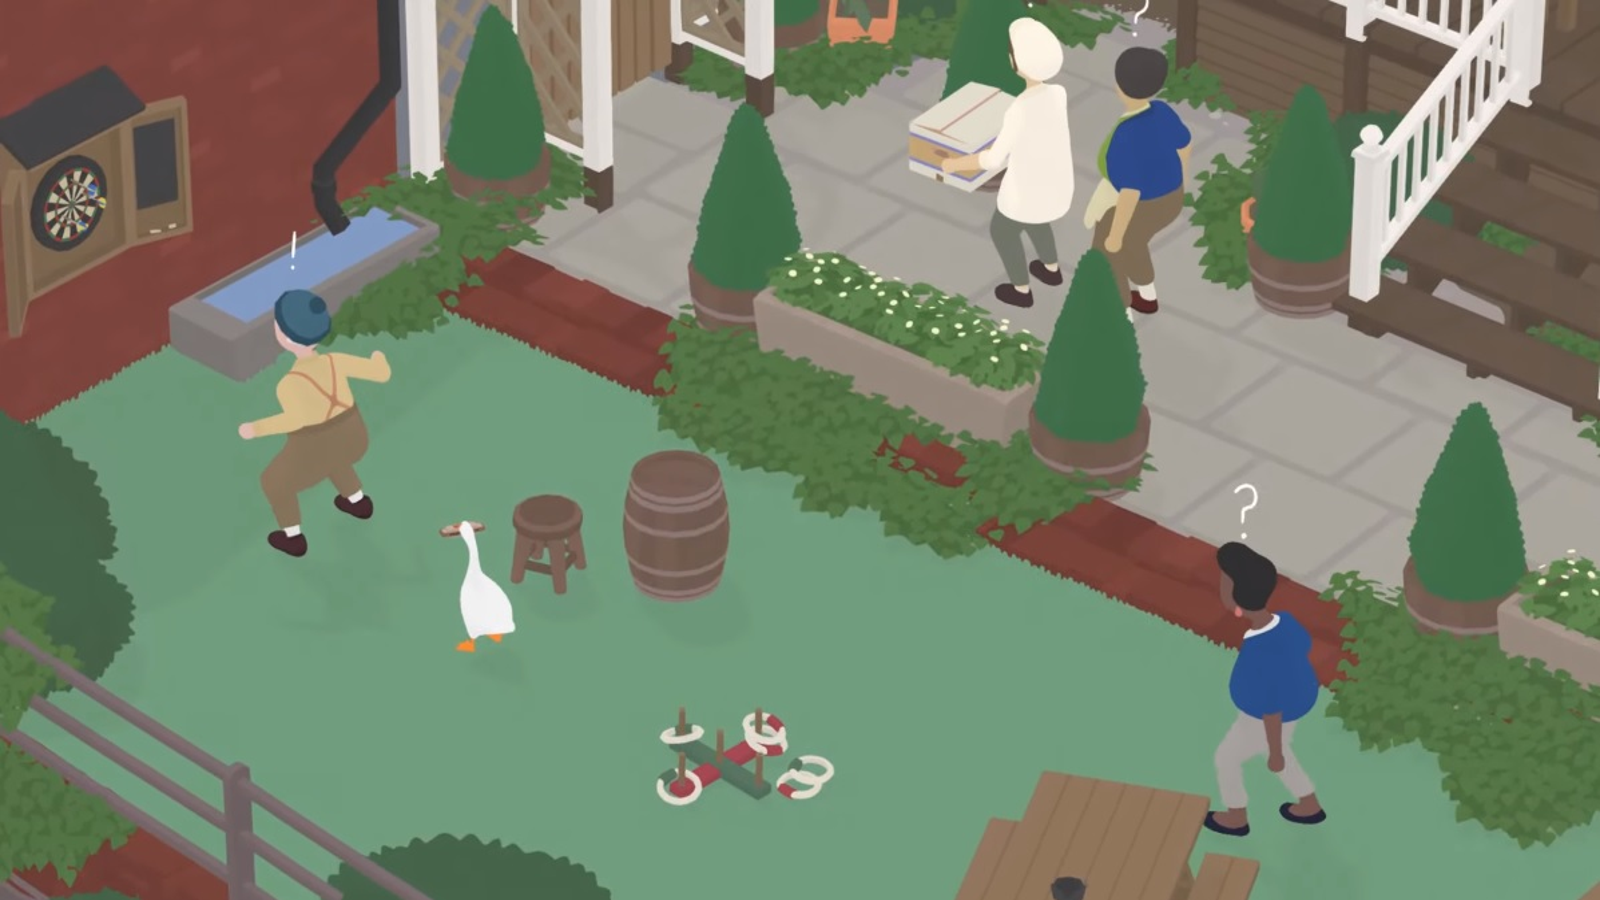 Untitled Goose Game co-op coming via free update on September 23